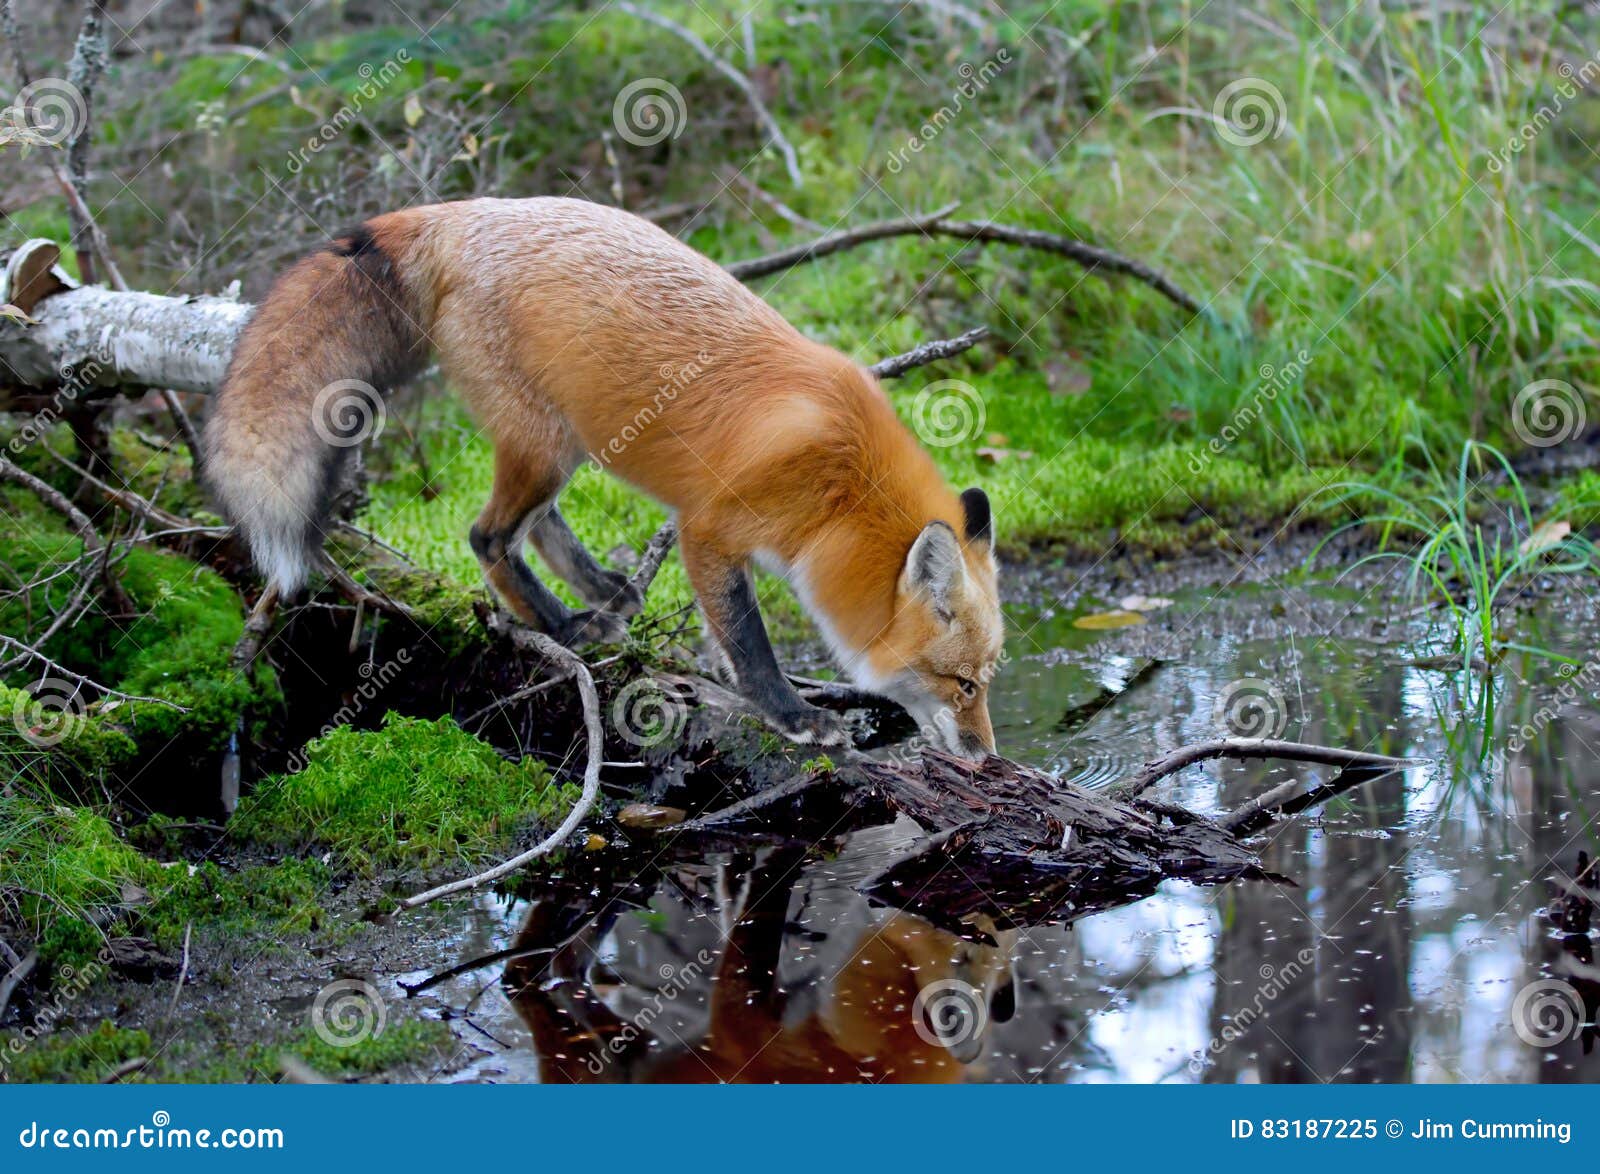 red fox vulpes vulpes drinking water in autumn in algonquin park in canada